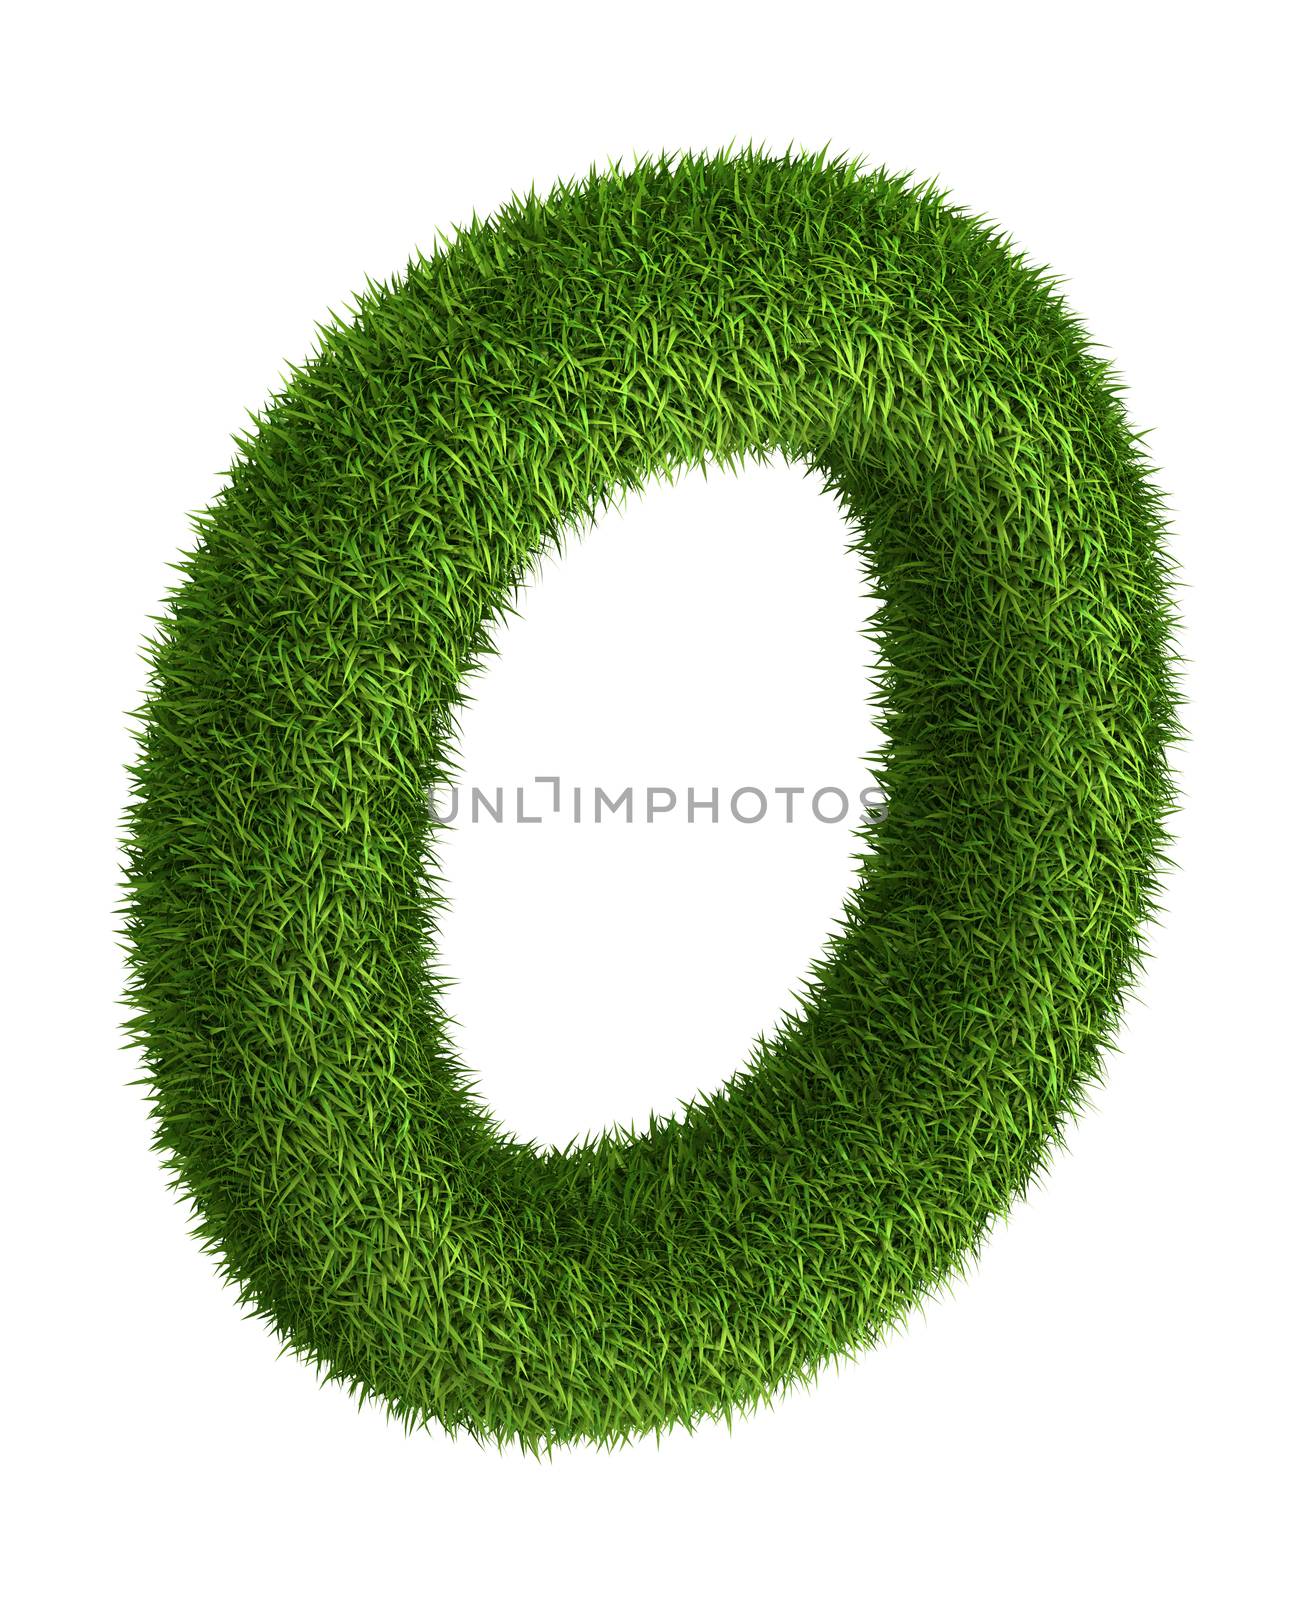 Natural grass letter by iunewind